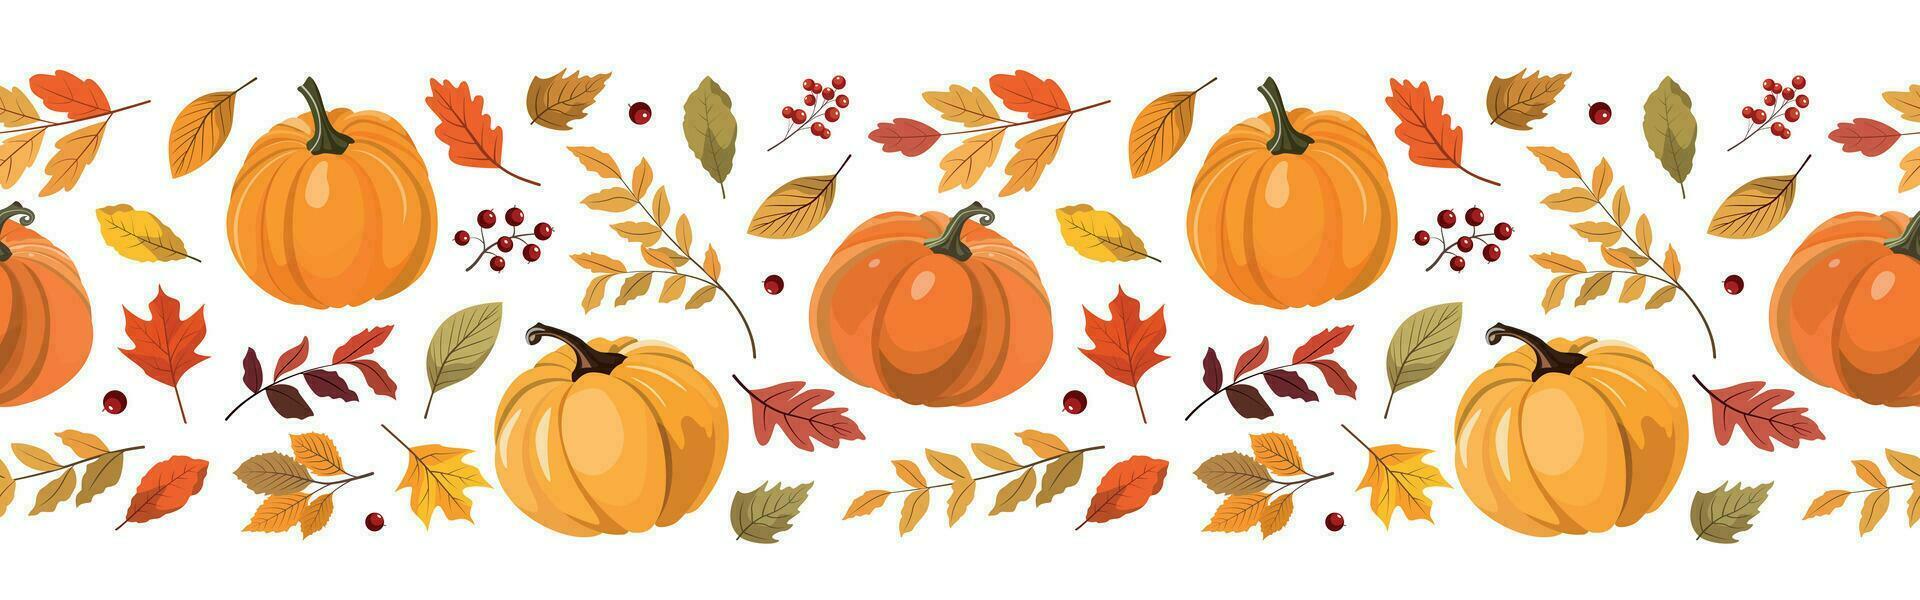 Colorful autumn pumpkins and forest leaves and berries horizontal seamless border. Vector illustration. Isolated on white background. Seasonal fall banner design for greeting or promotion.